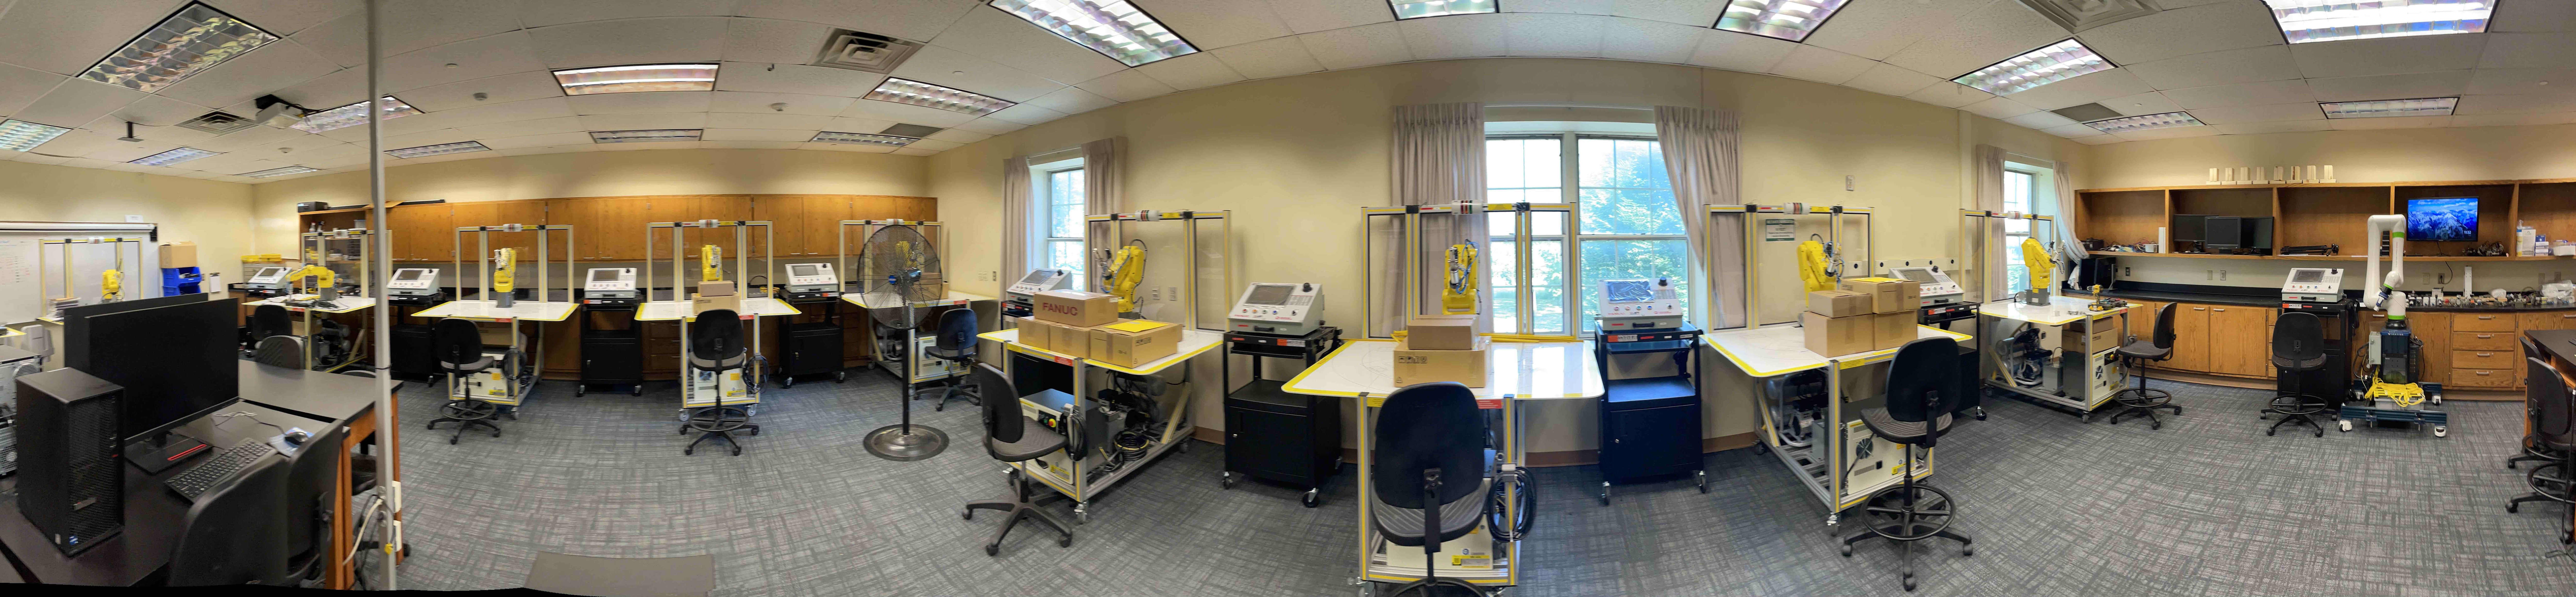 New robots funded by the contract in an ETM lab at Stocker Center.